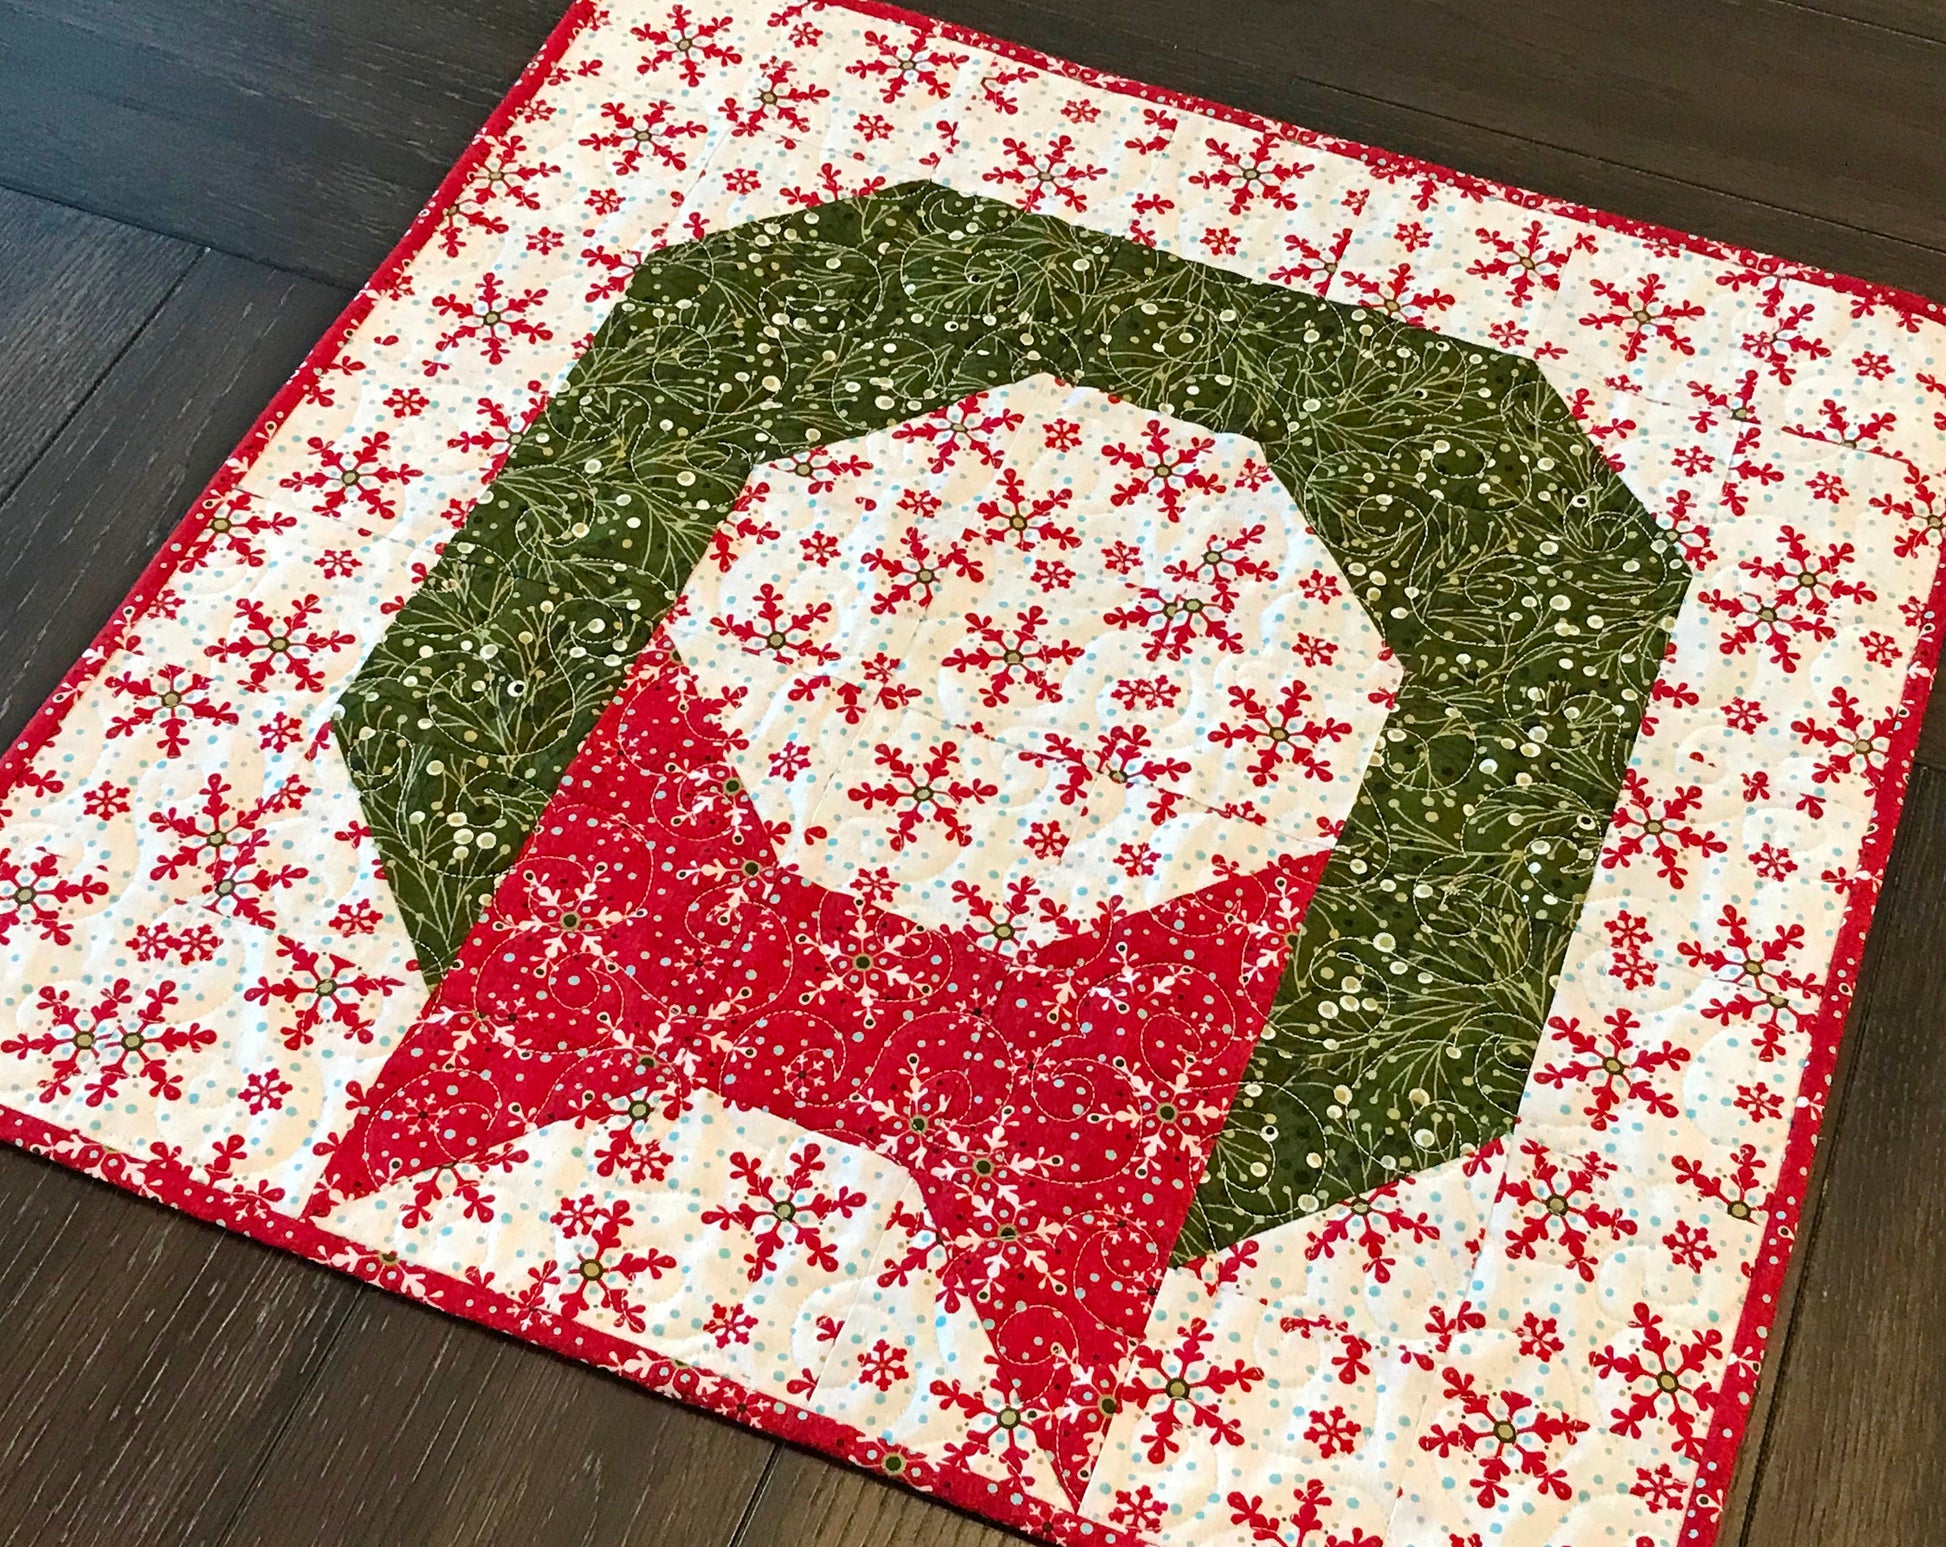 Christmas Wreath Table Runner and Table Topper Pattern - Digital Pattern - Handmade Quilts, Digital Patterns, and Home Décor items online - Cuddle Cat Quiltworks